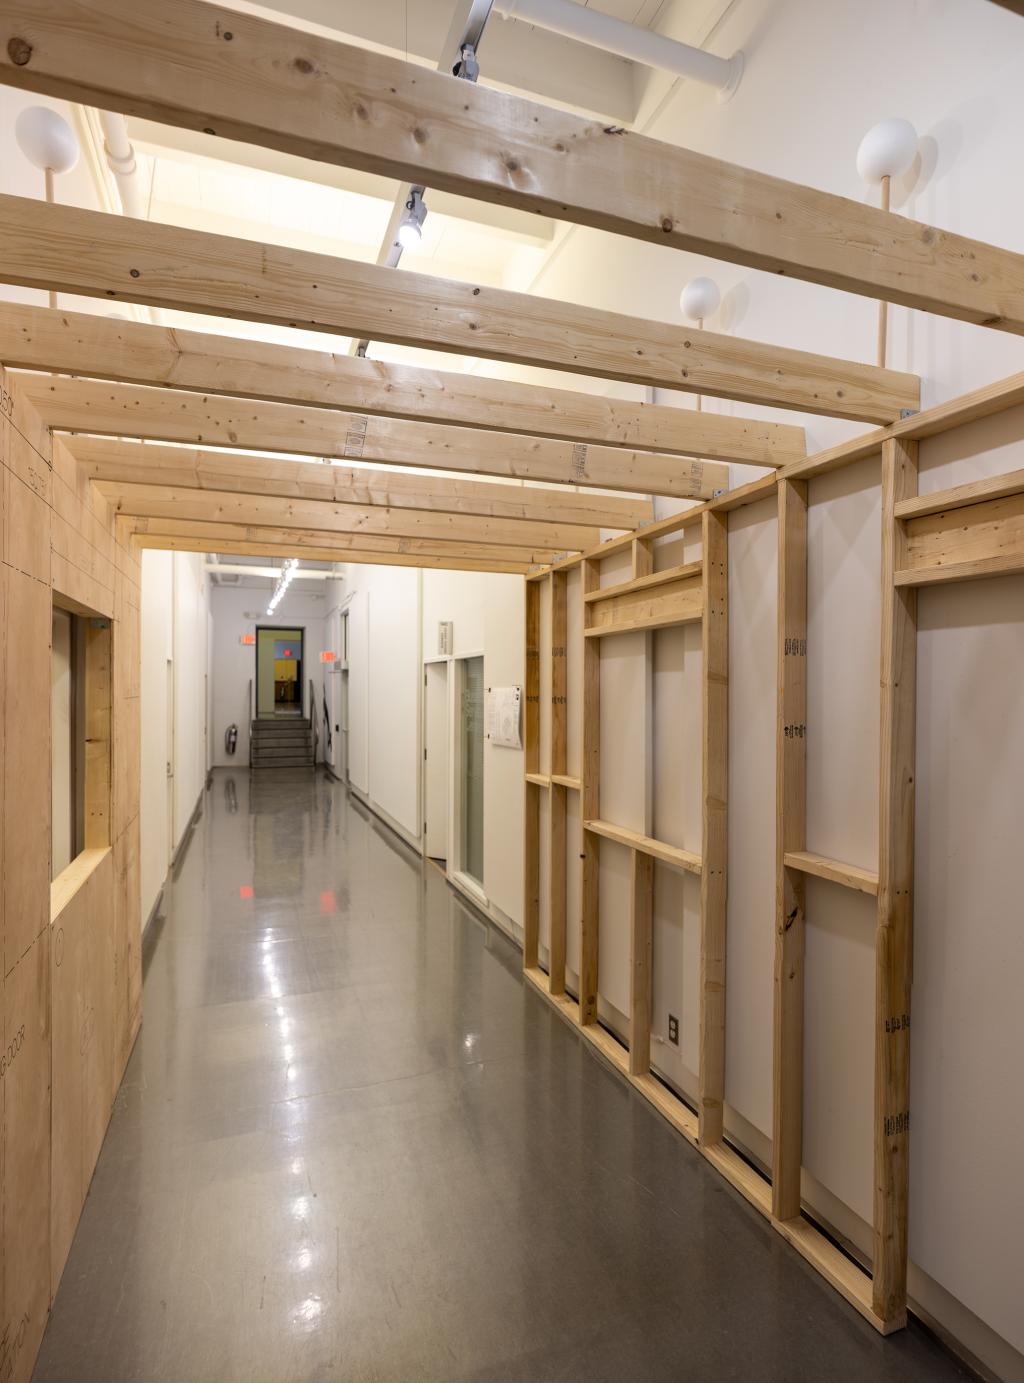 A hallway with wooden beams installed